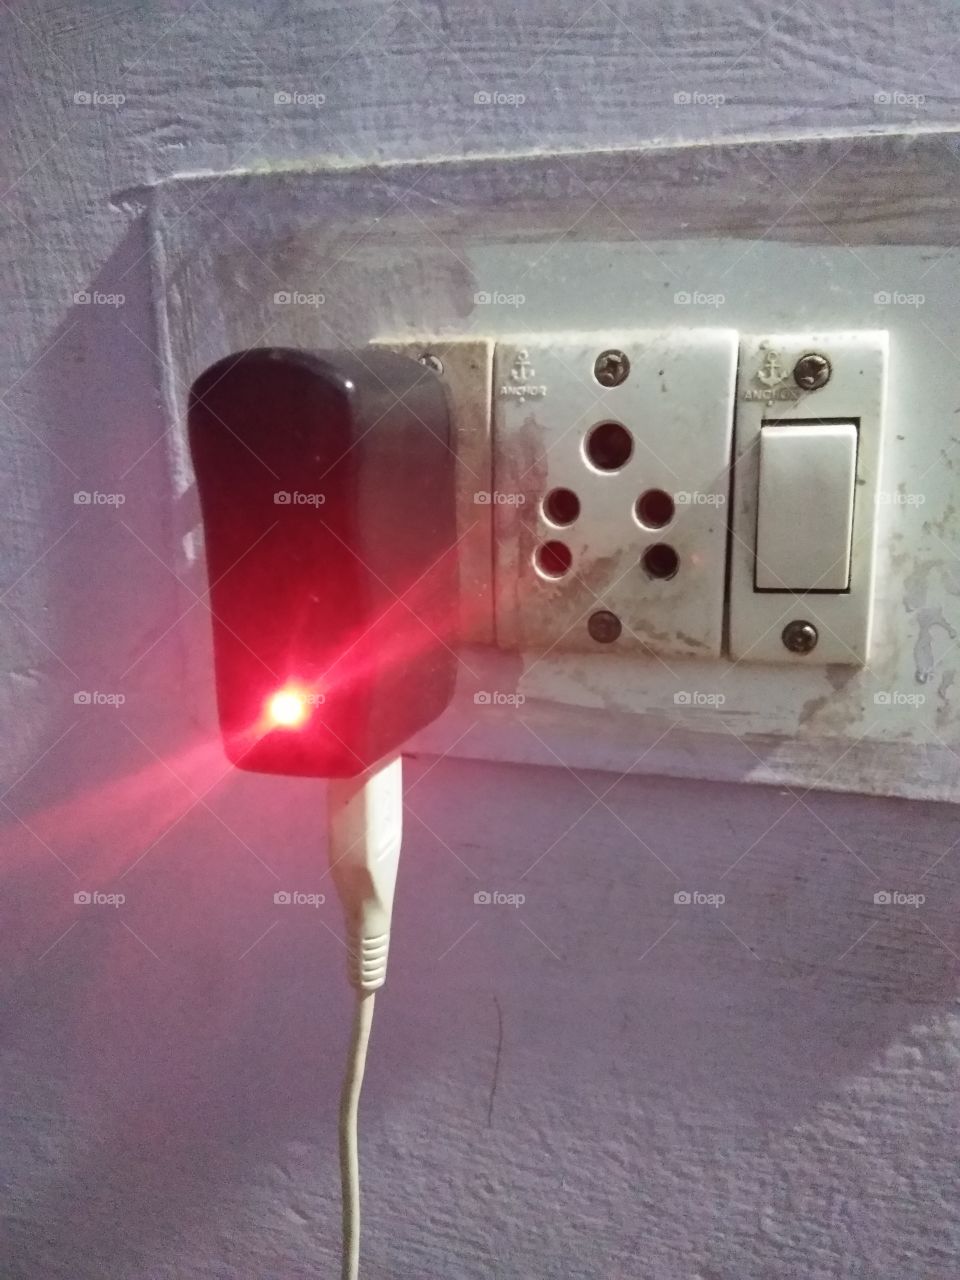 switch on mobile charger HD image. jpg